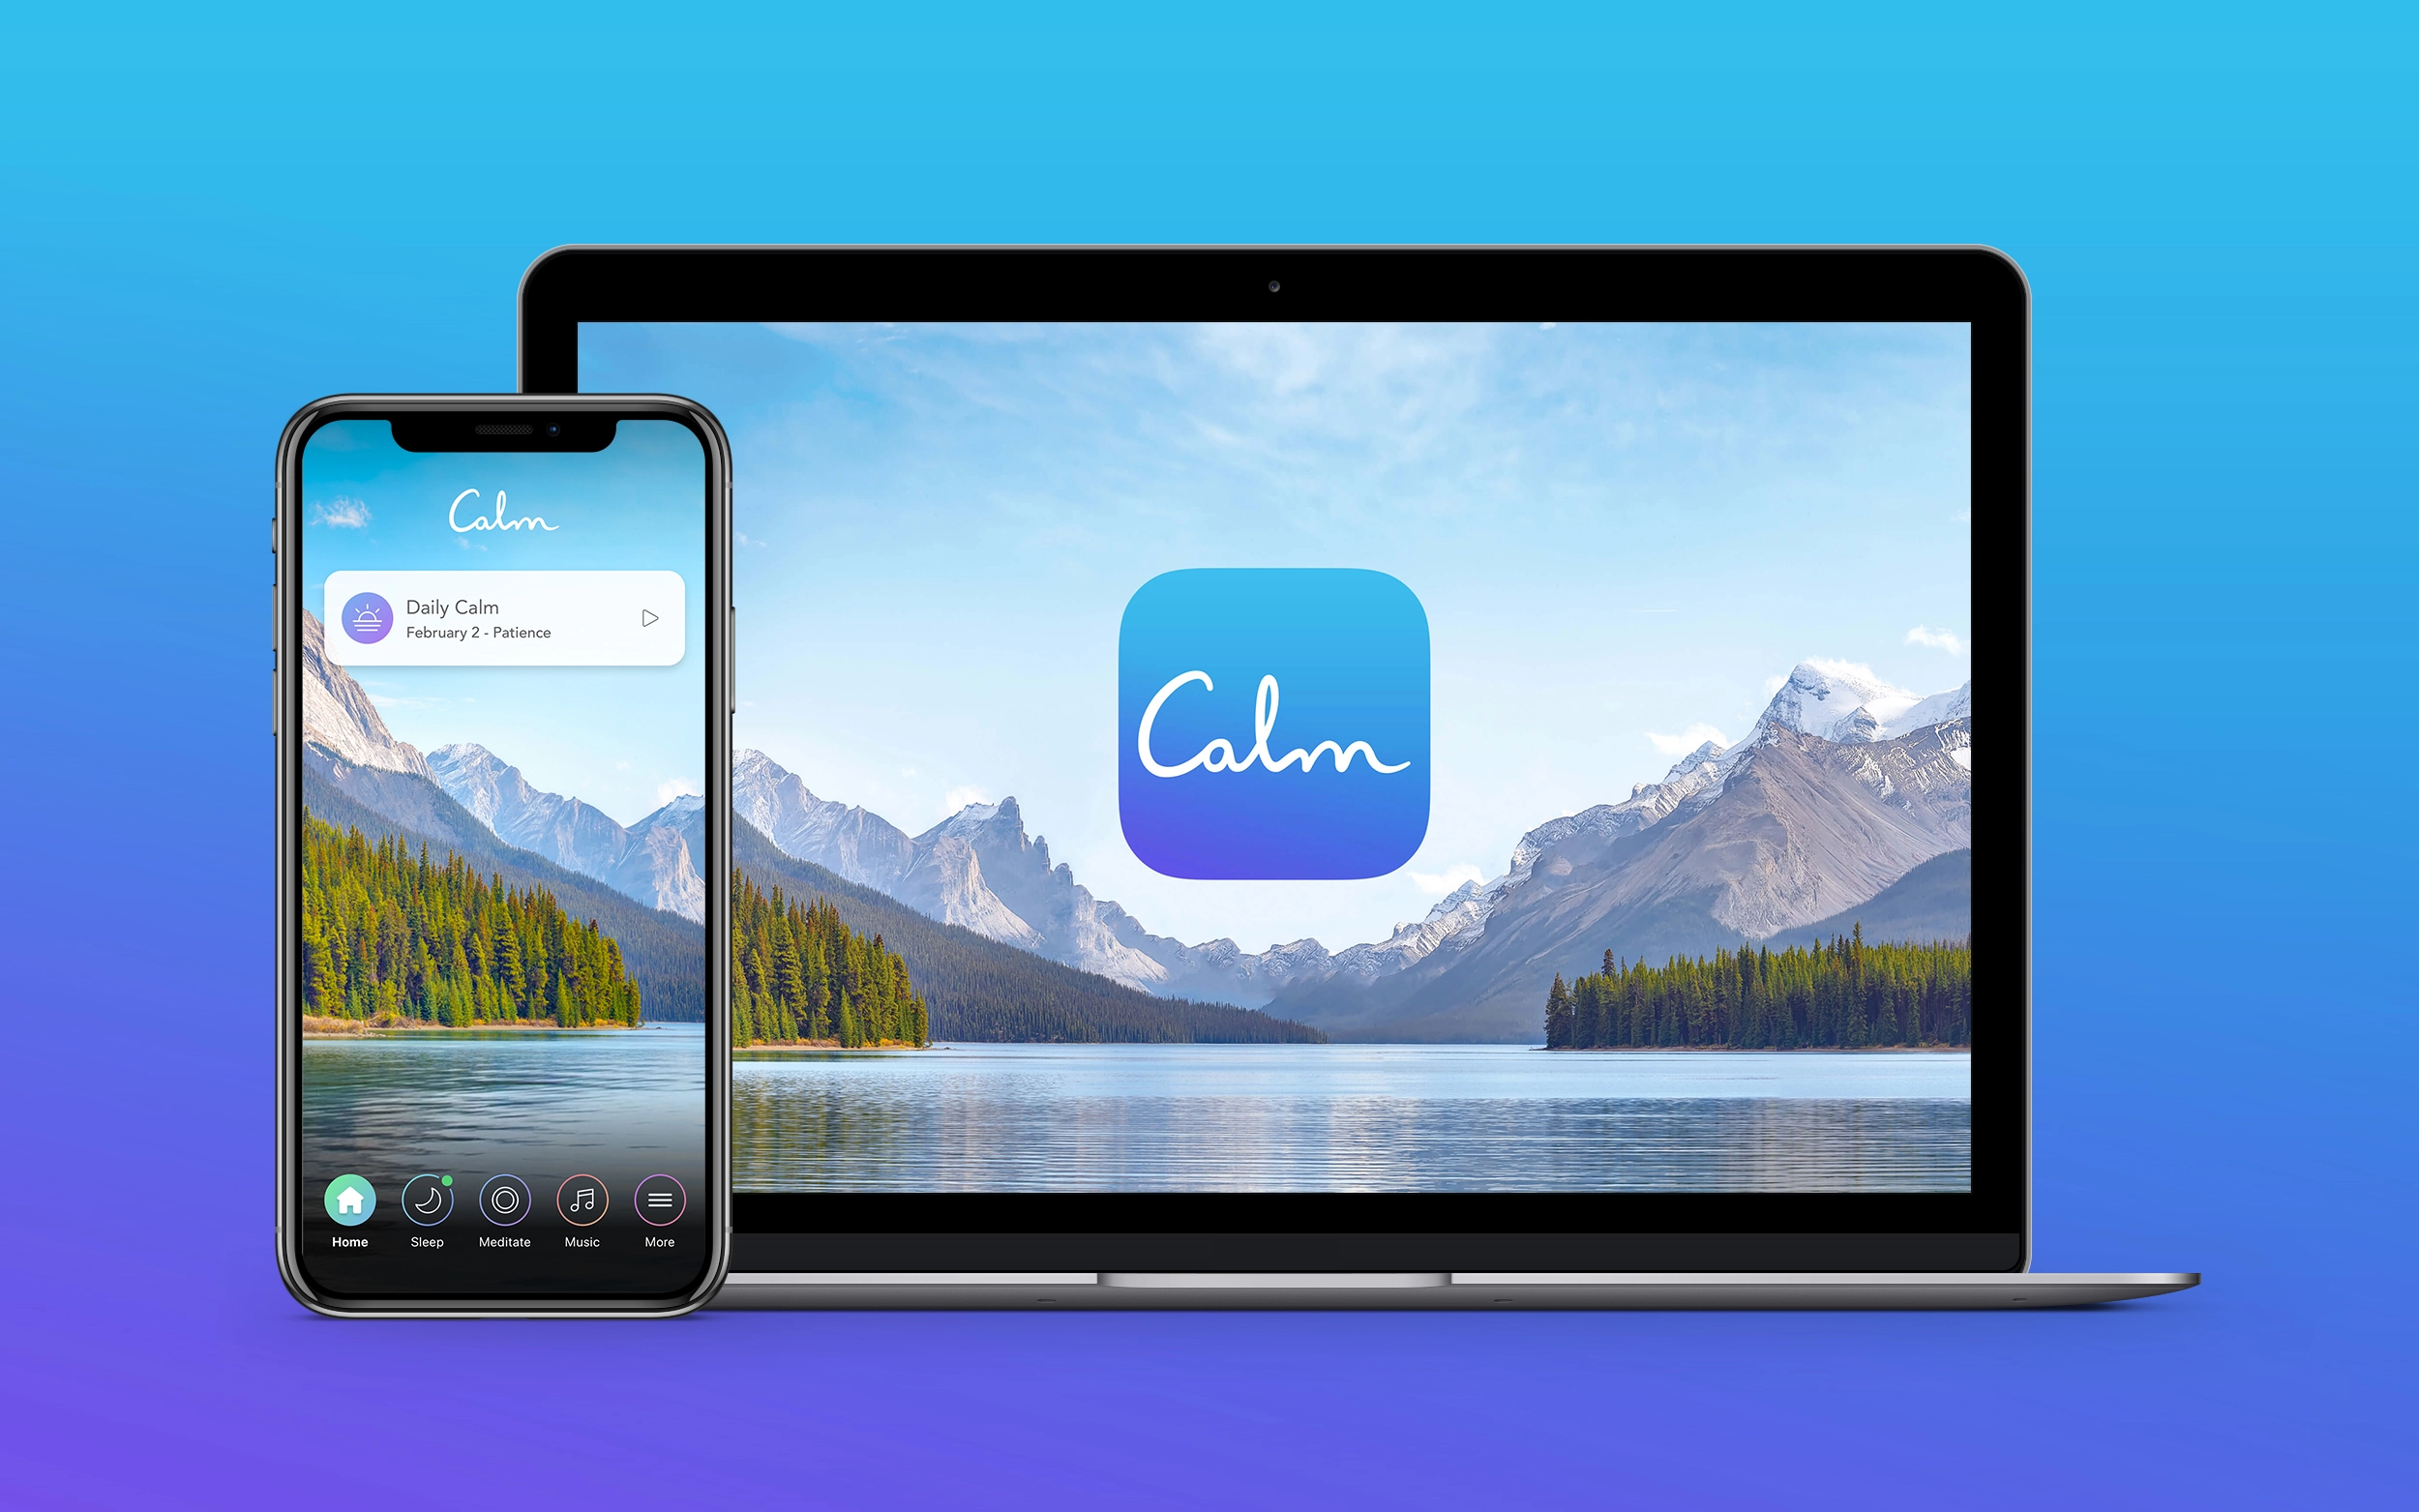 Calm Premium - 3 Months Trial Subscription Key (ONLY FOR NEW ACCOUNTS) [USD 0.8]